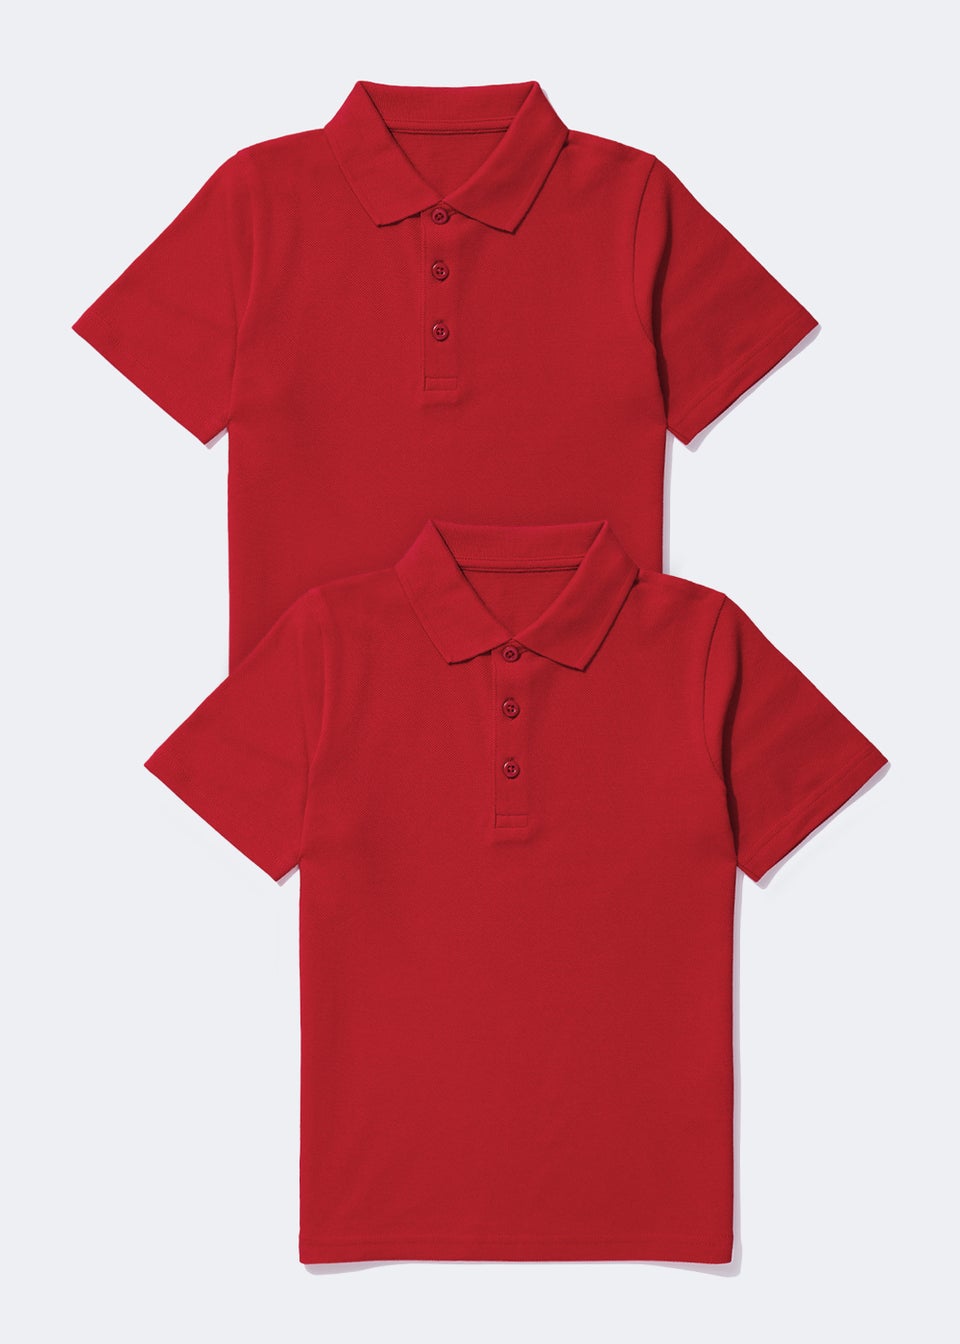 Kids 2 Pack Red School Polo Shirts (3-13yrs)